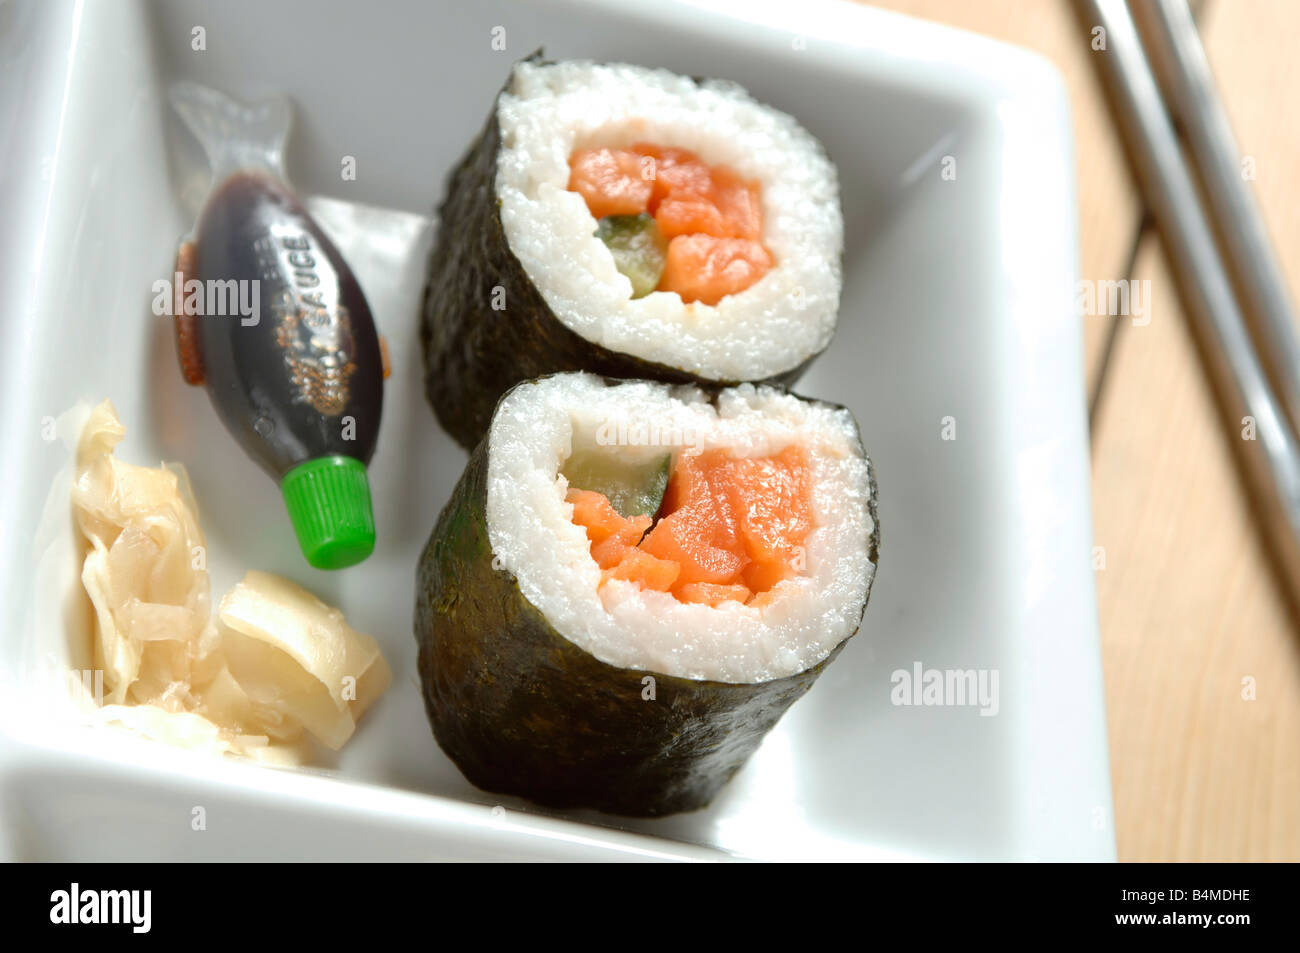 a small dish of sushi with chopsticks, vegetable or fish sushi at a restaurant or take away Stock Photo